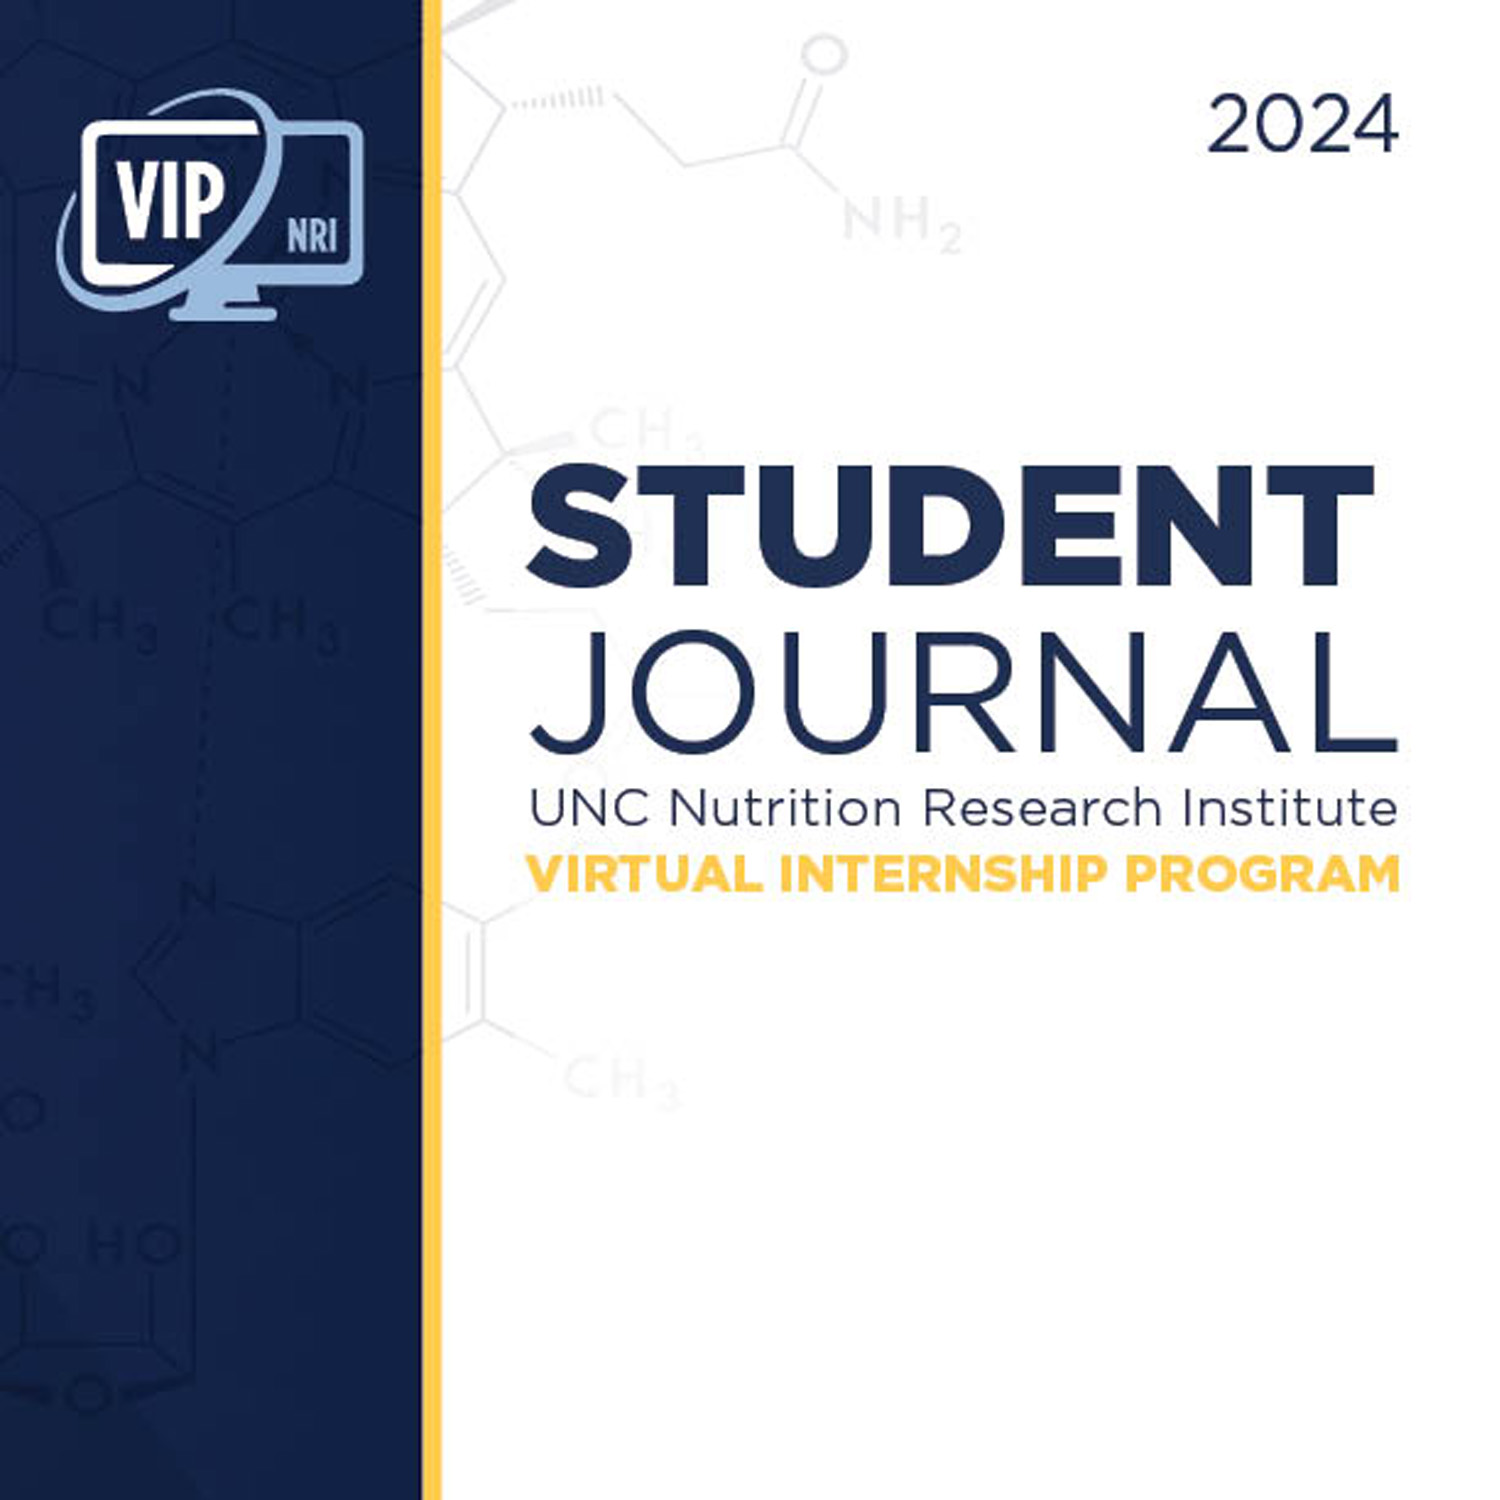 VIP 2024: Empowering the Next Generation of Nutrition Researchers